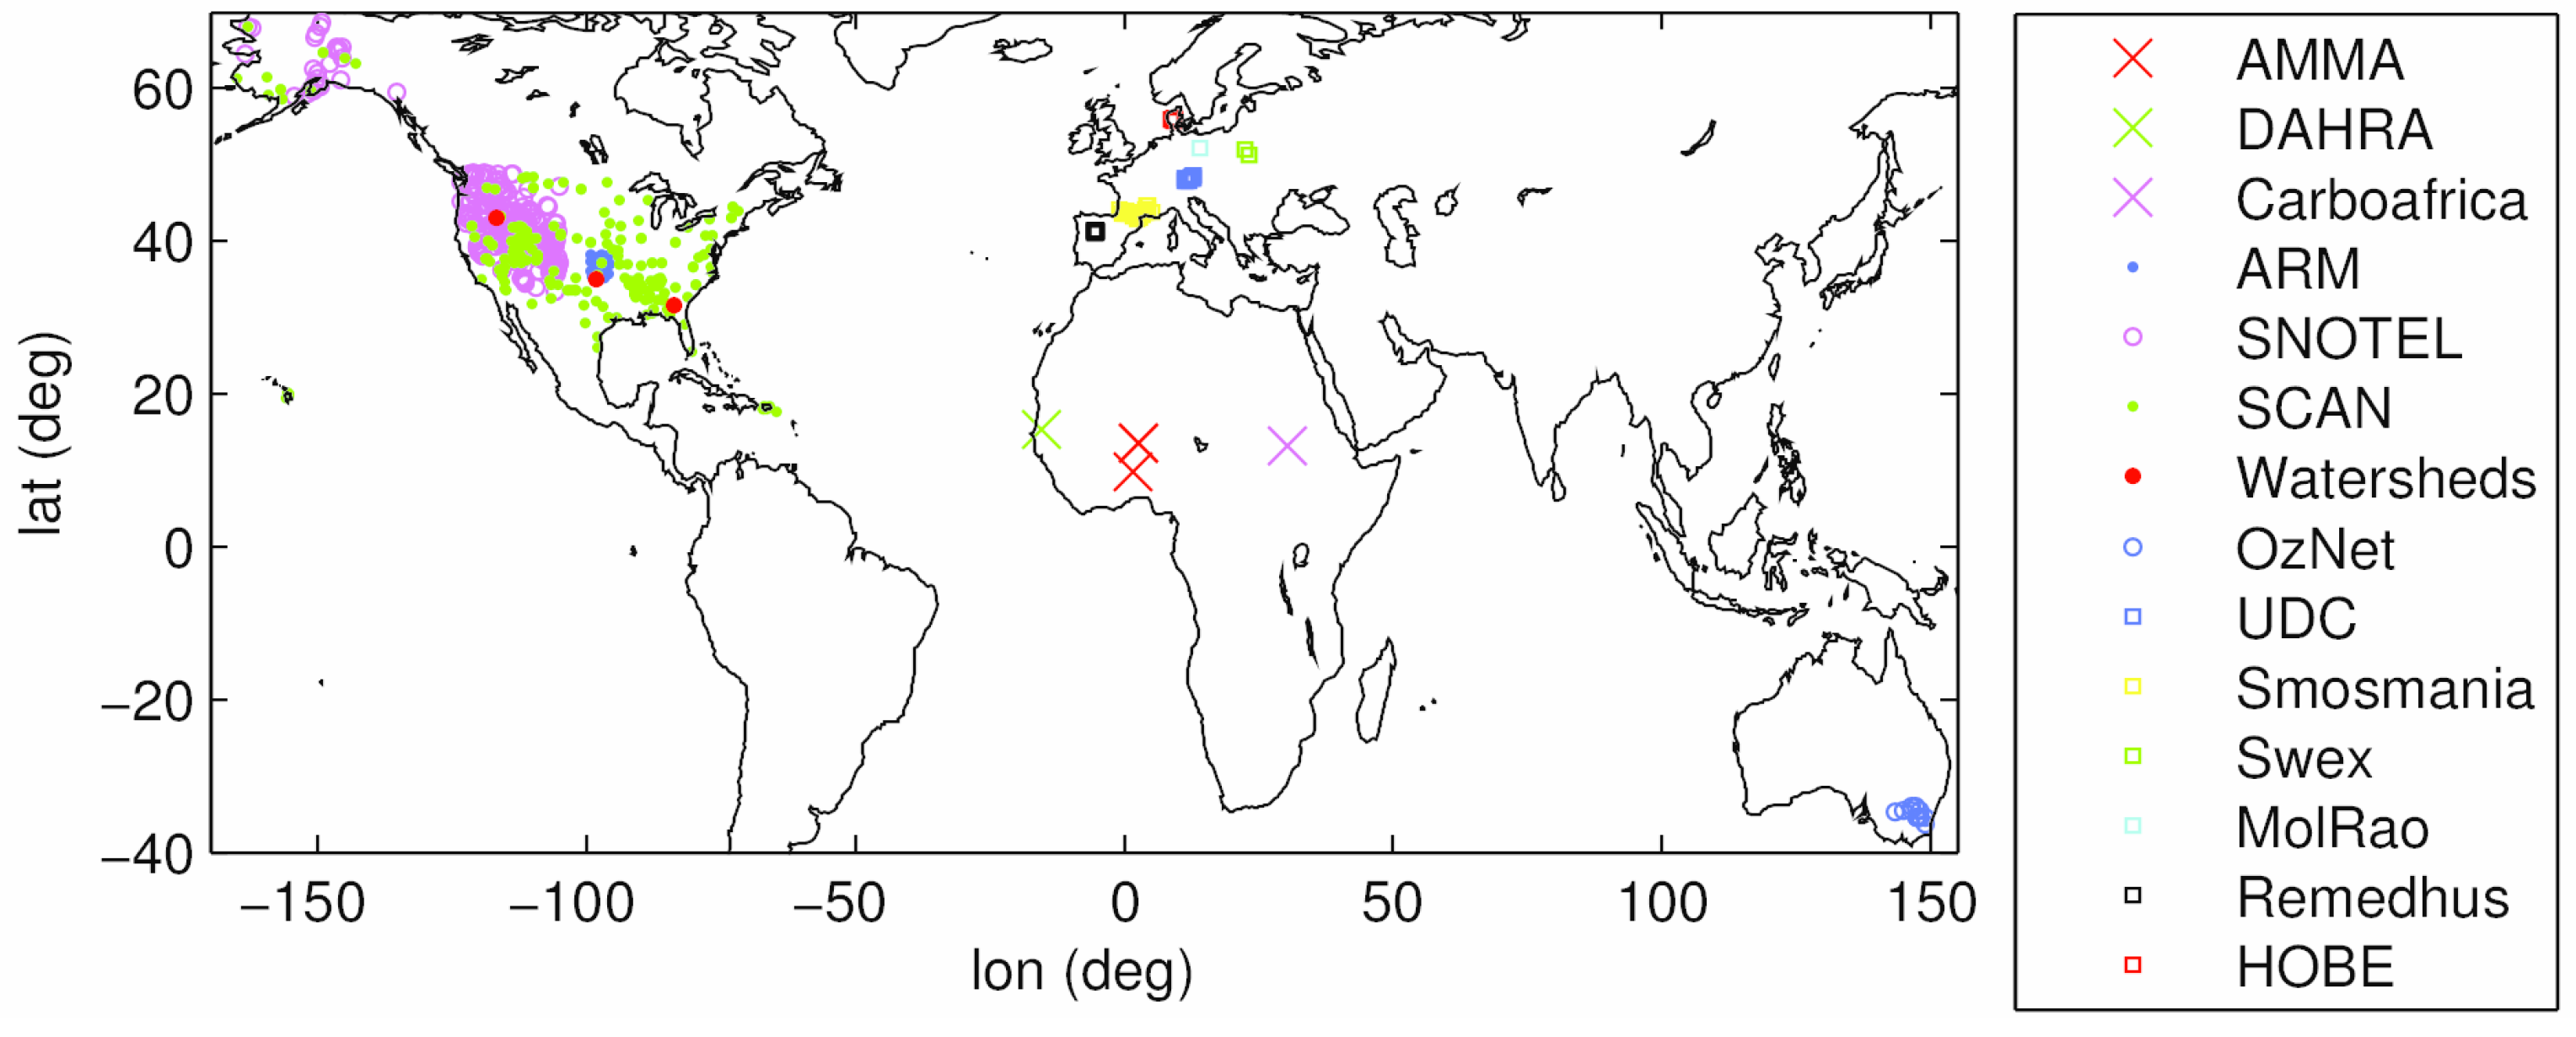 Remote Sensing | Free Full-Text | Long Term Global Surface Soil Moisture  Fields Using an SMOS-Trained Neural Network Applied to AMSR-E Data